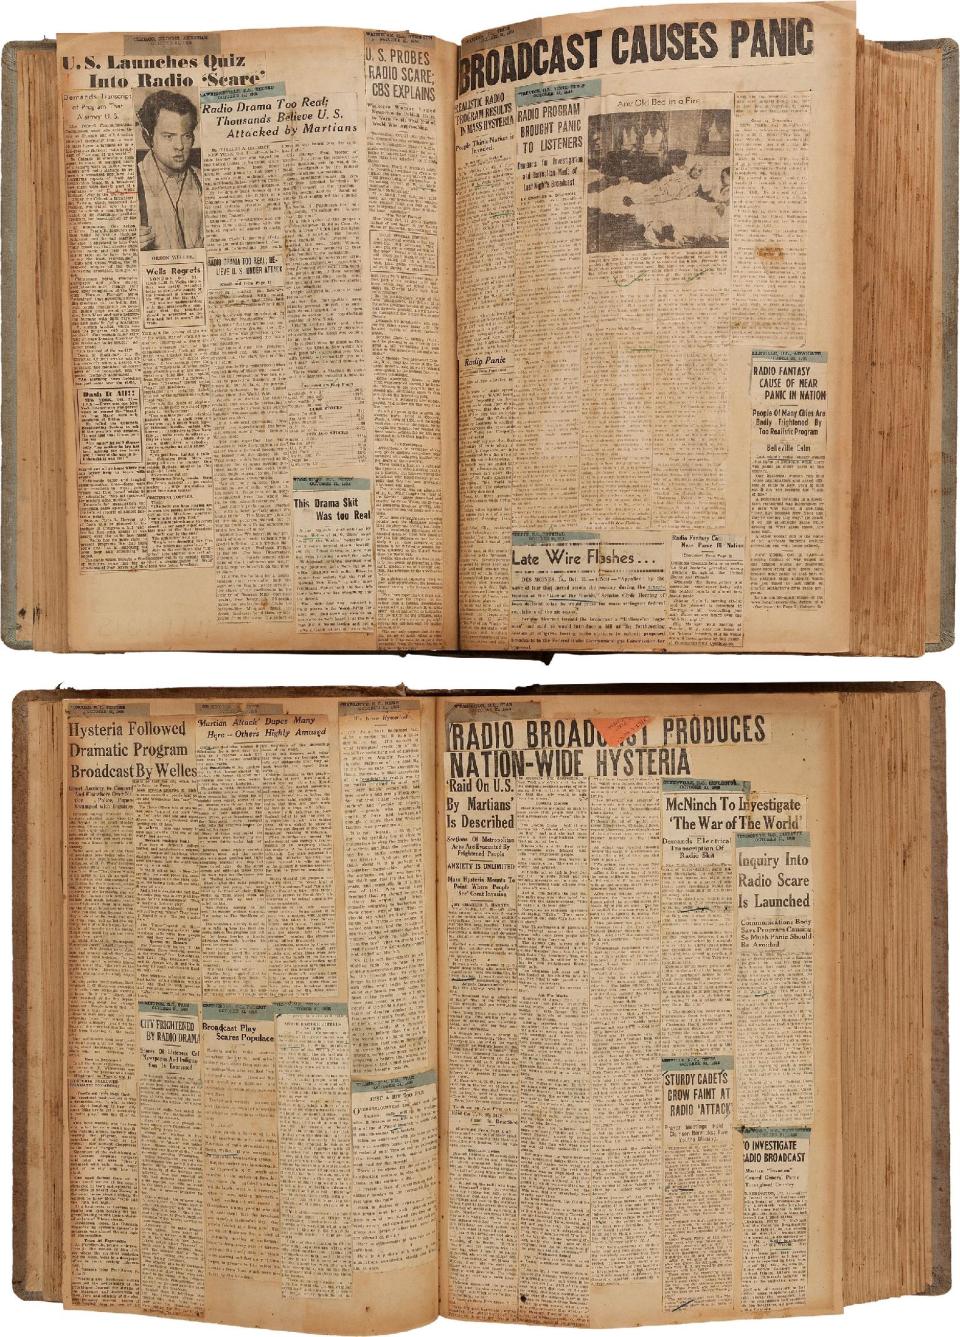 This photo provided by Heritage Auctions shows two scrapbooks filled with newspaper clippings about the nationwide panic from Orson Welles' 1938 radio broadcast of "War of the Worlds" which are among the Welle's items consigned by his daughter, Beatrice, that will be offered by Heritage Auctions in New York City on April 26, 2014. (AP Photo/Heritage Auctions) Photo credit: